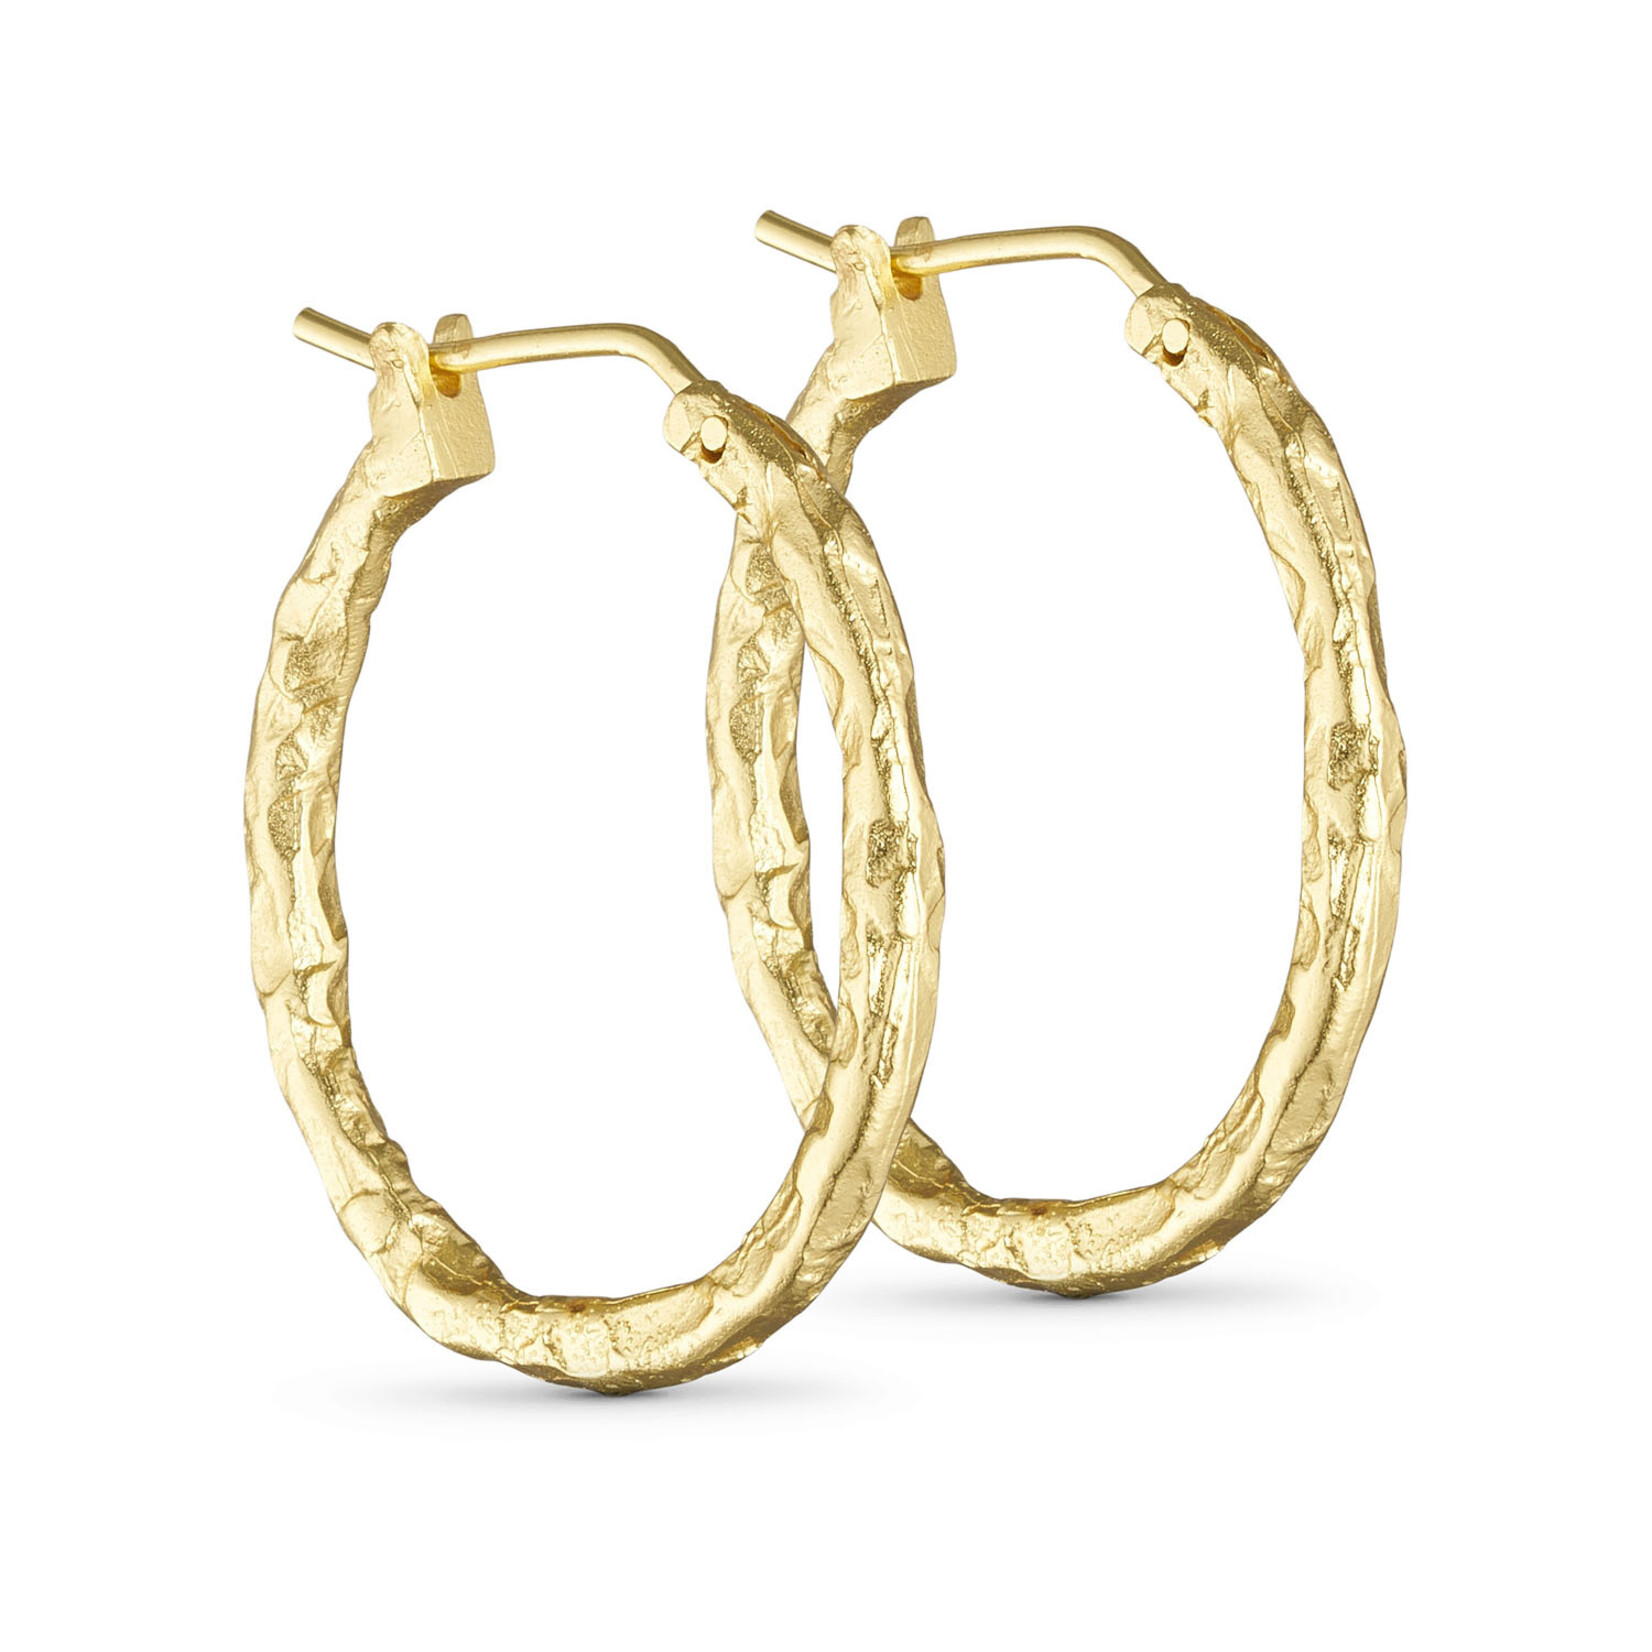 Pure by nat Earrings Hoop Foil 28mm - Gold Plated